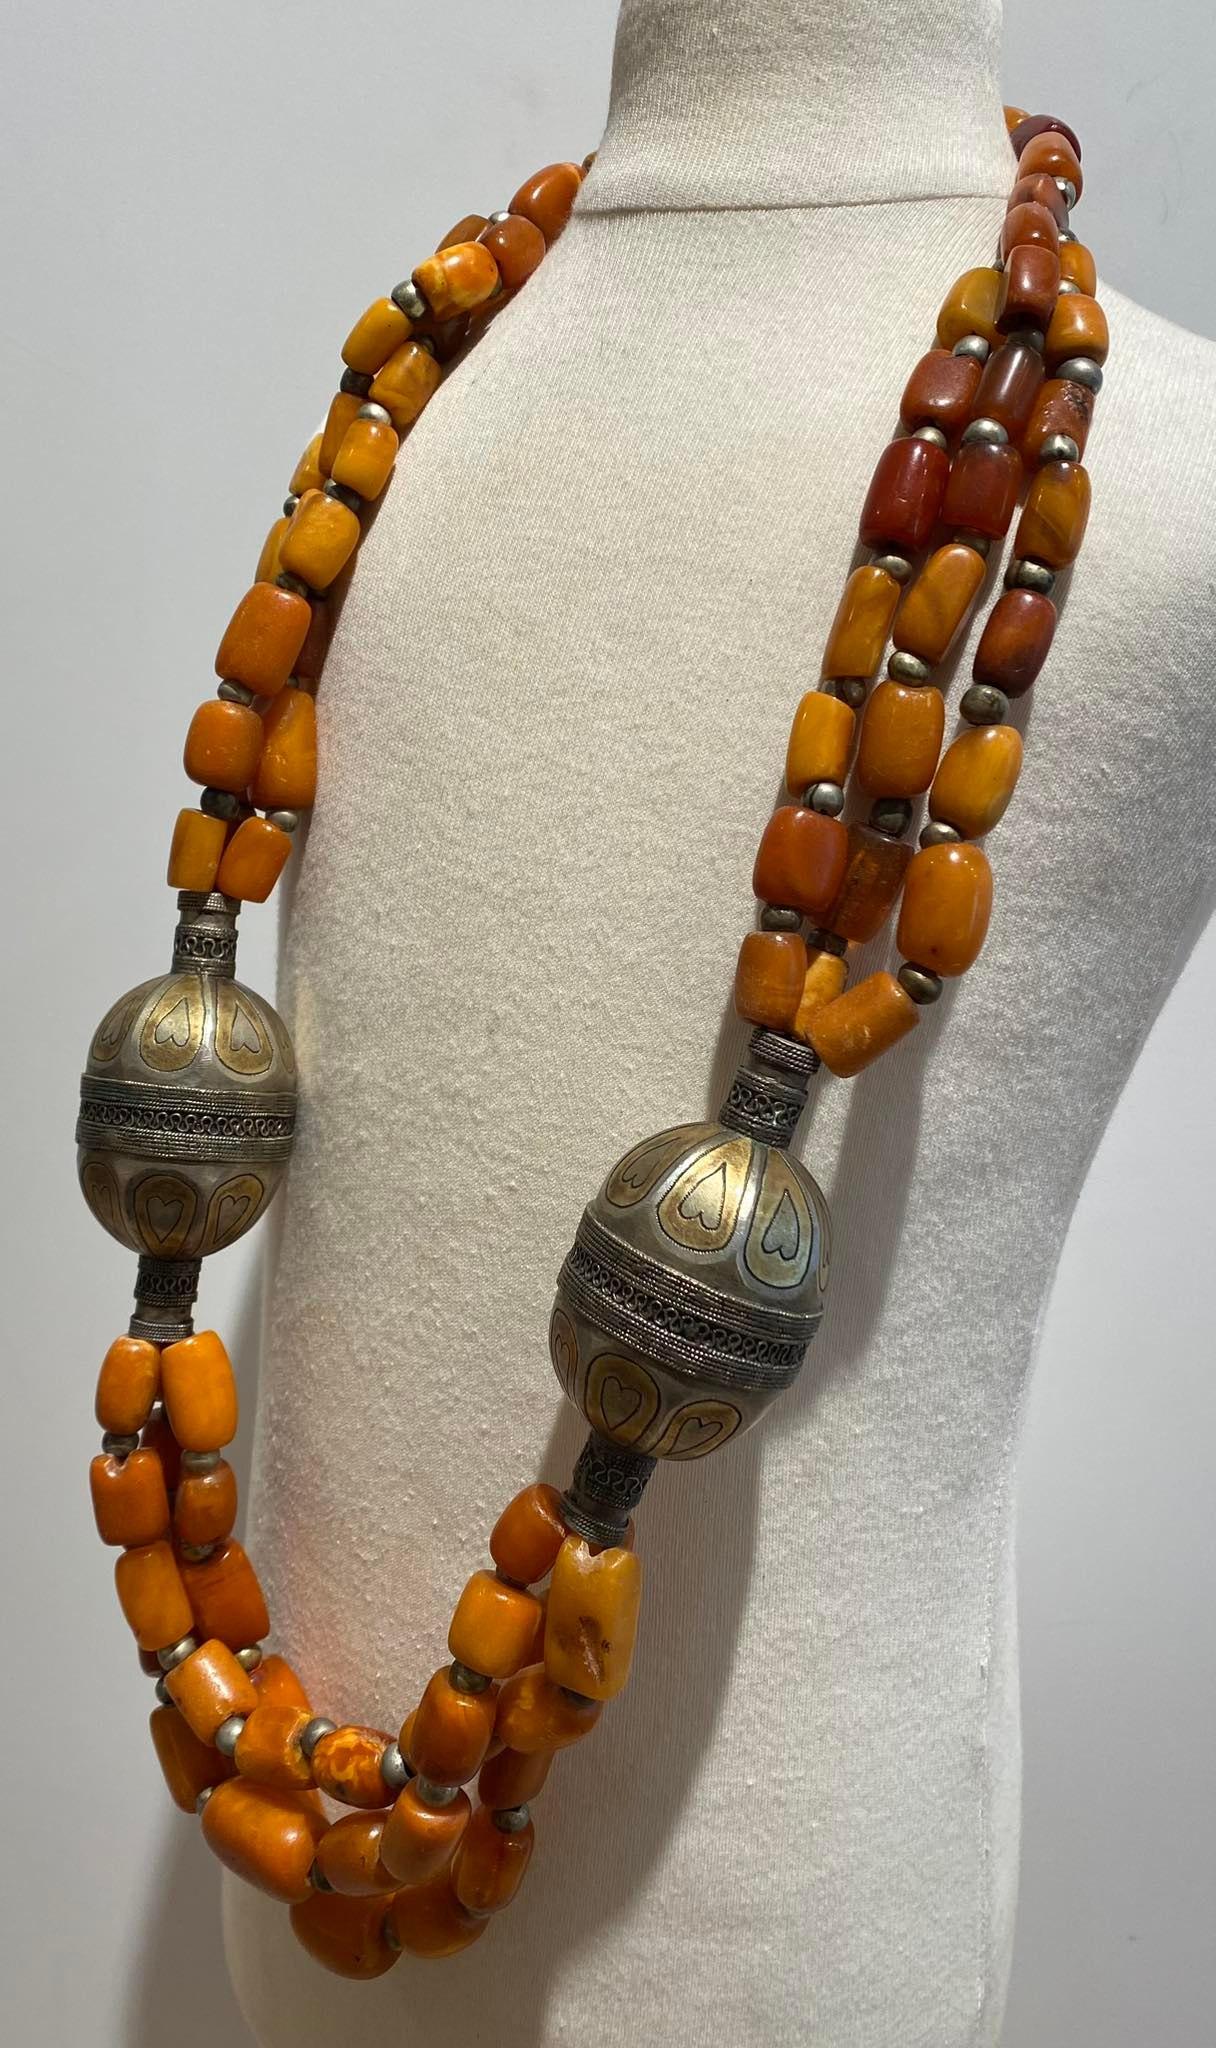  Antique Amber Necklace Yemen Afghanistan 18/19th Century Islamic Art silver  For Sale 9